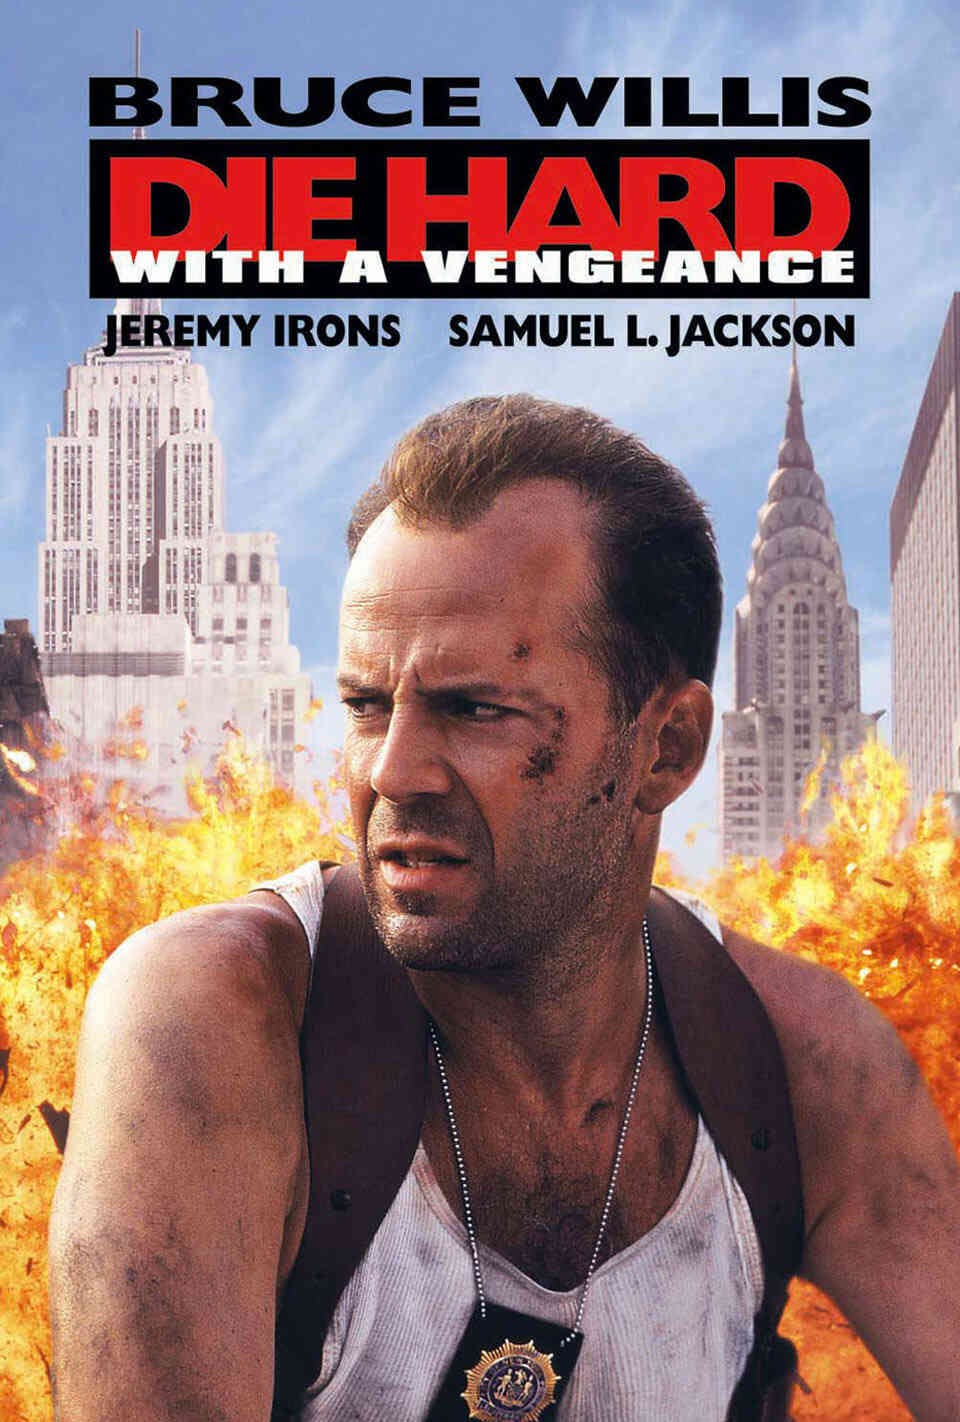 Read Die Hard with a Vengeance screenplay (poster)